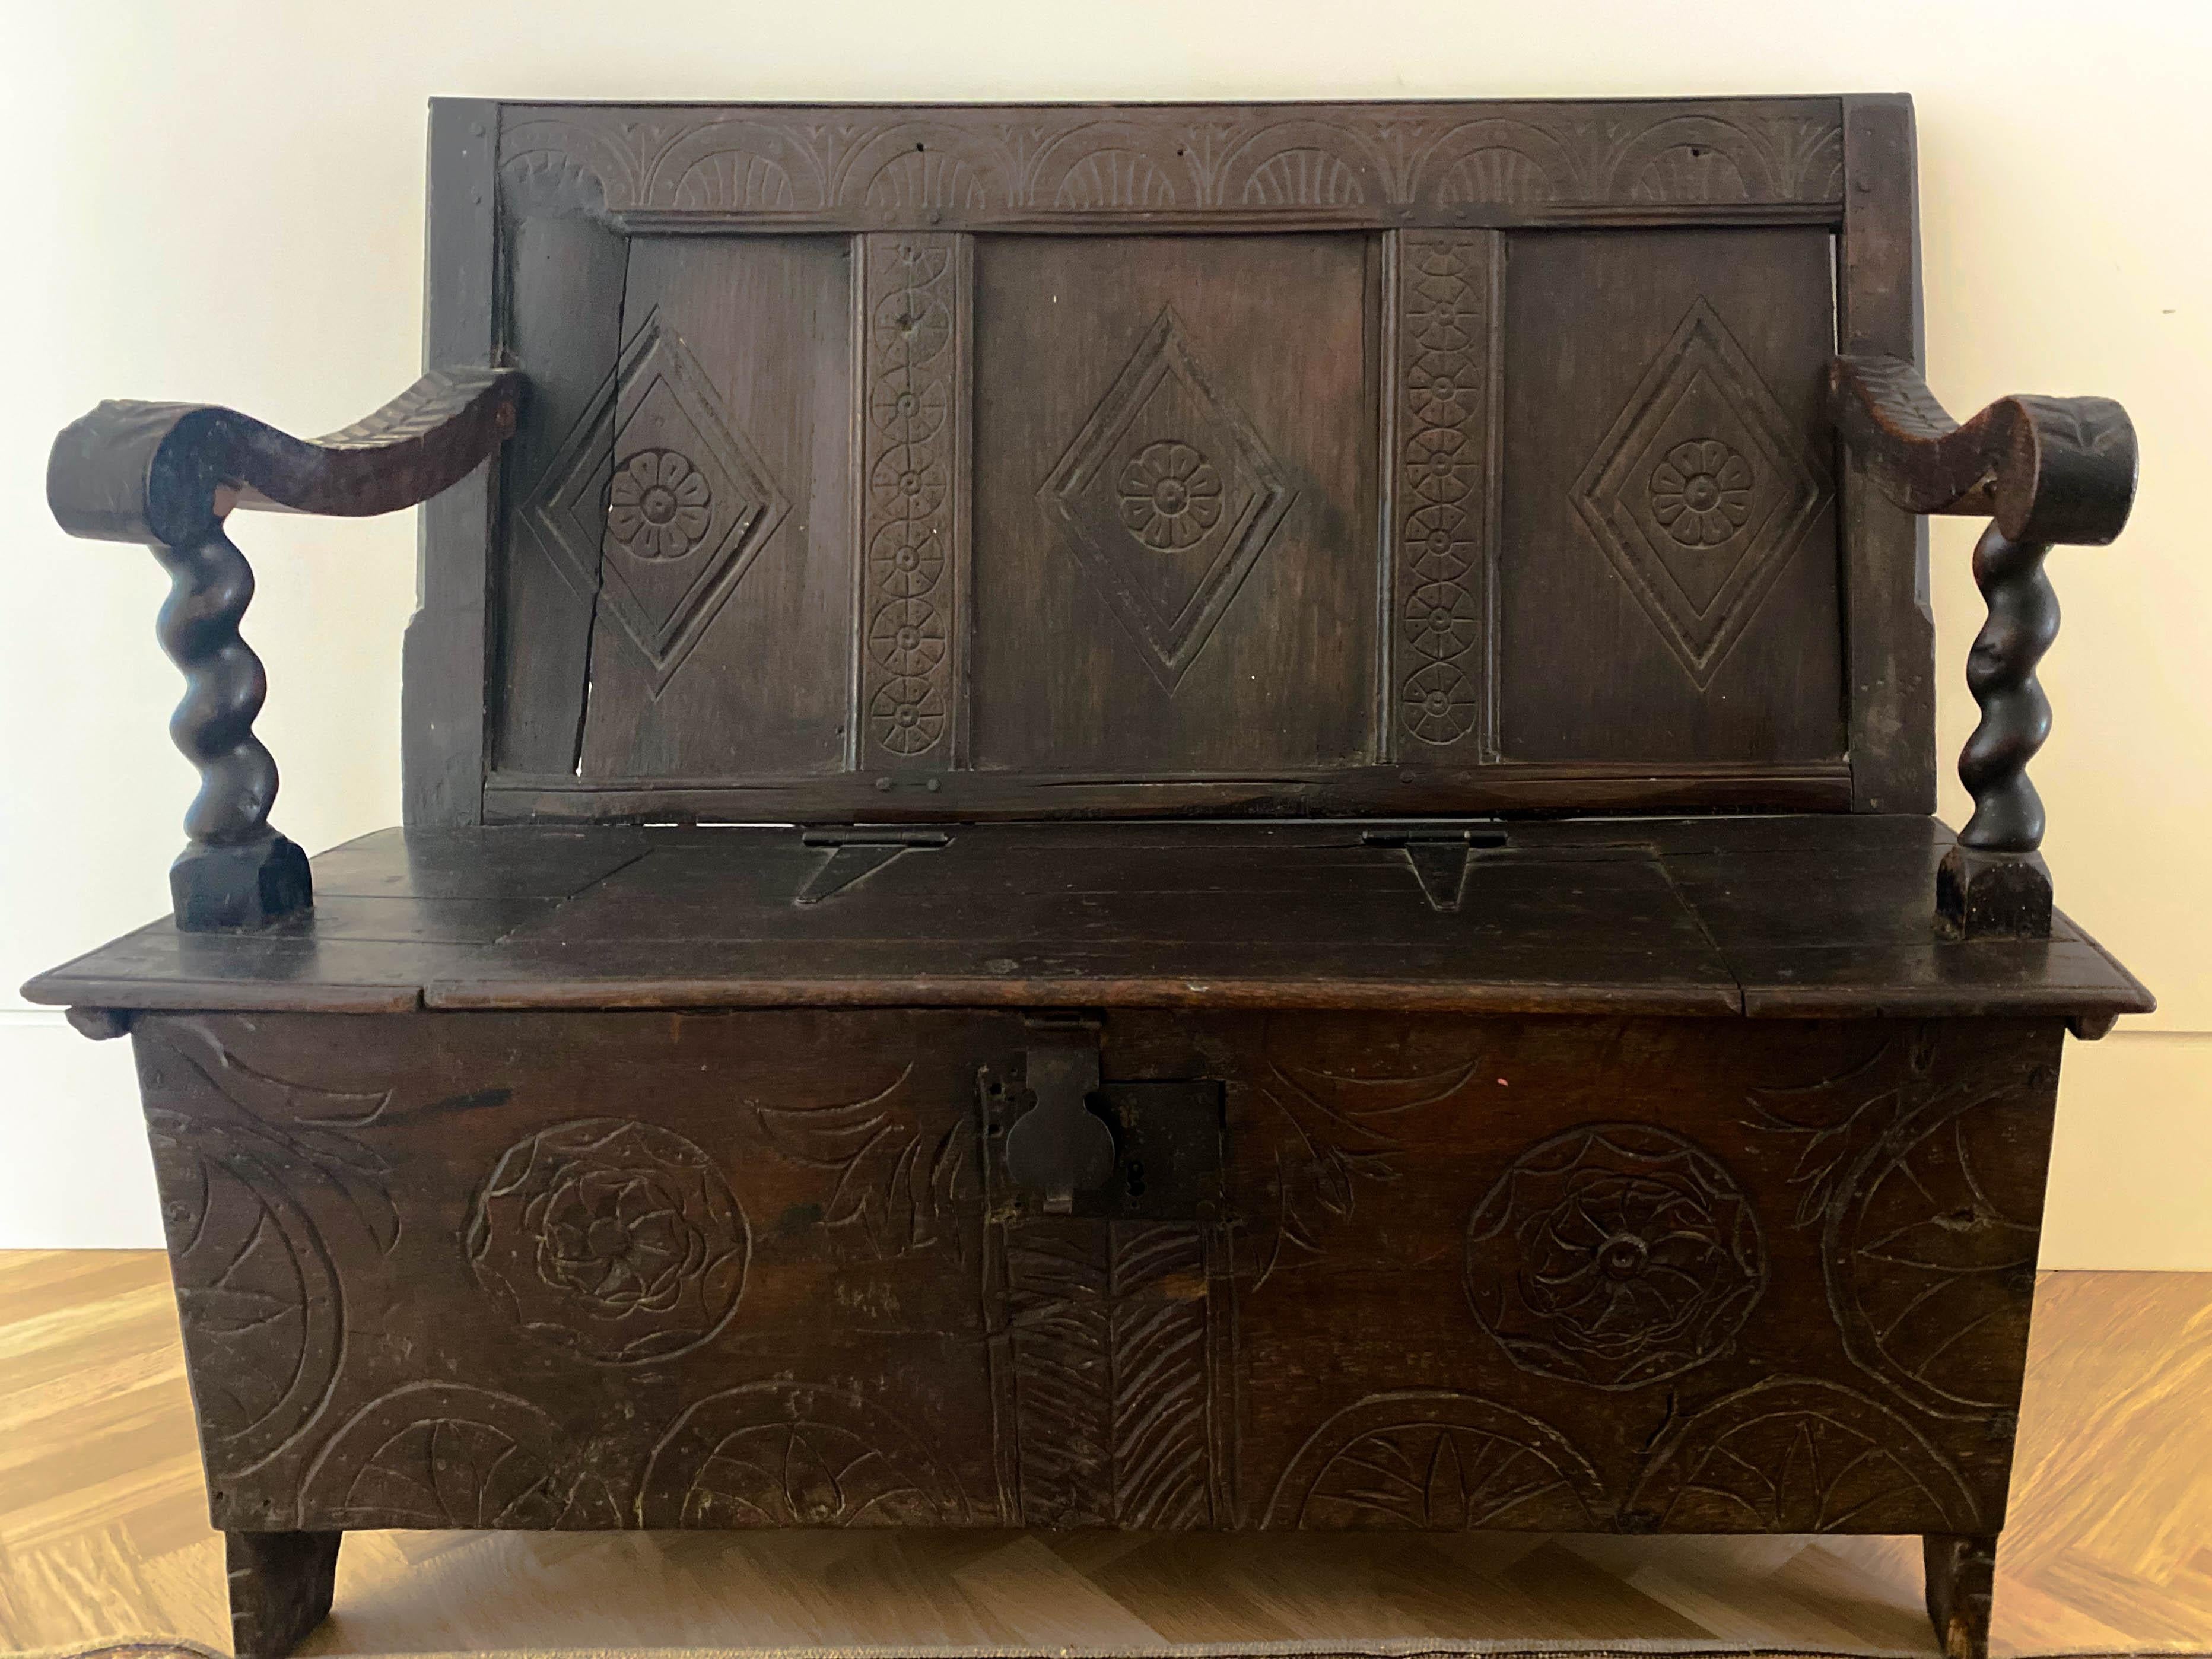 19th century American long wooden bench in ebonized black features hand-carved wood back and. Meticulous storage under seat.